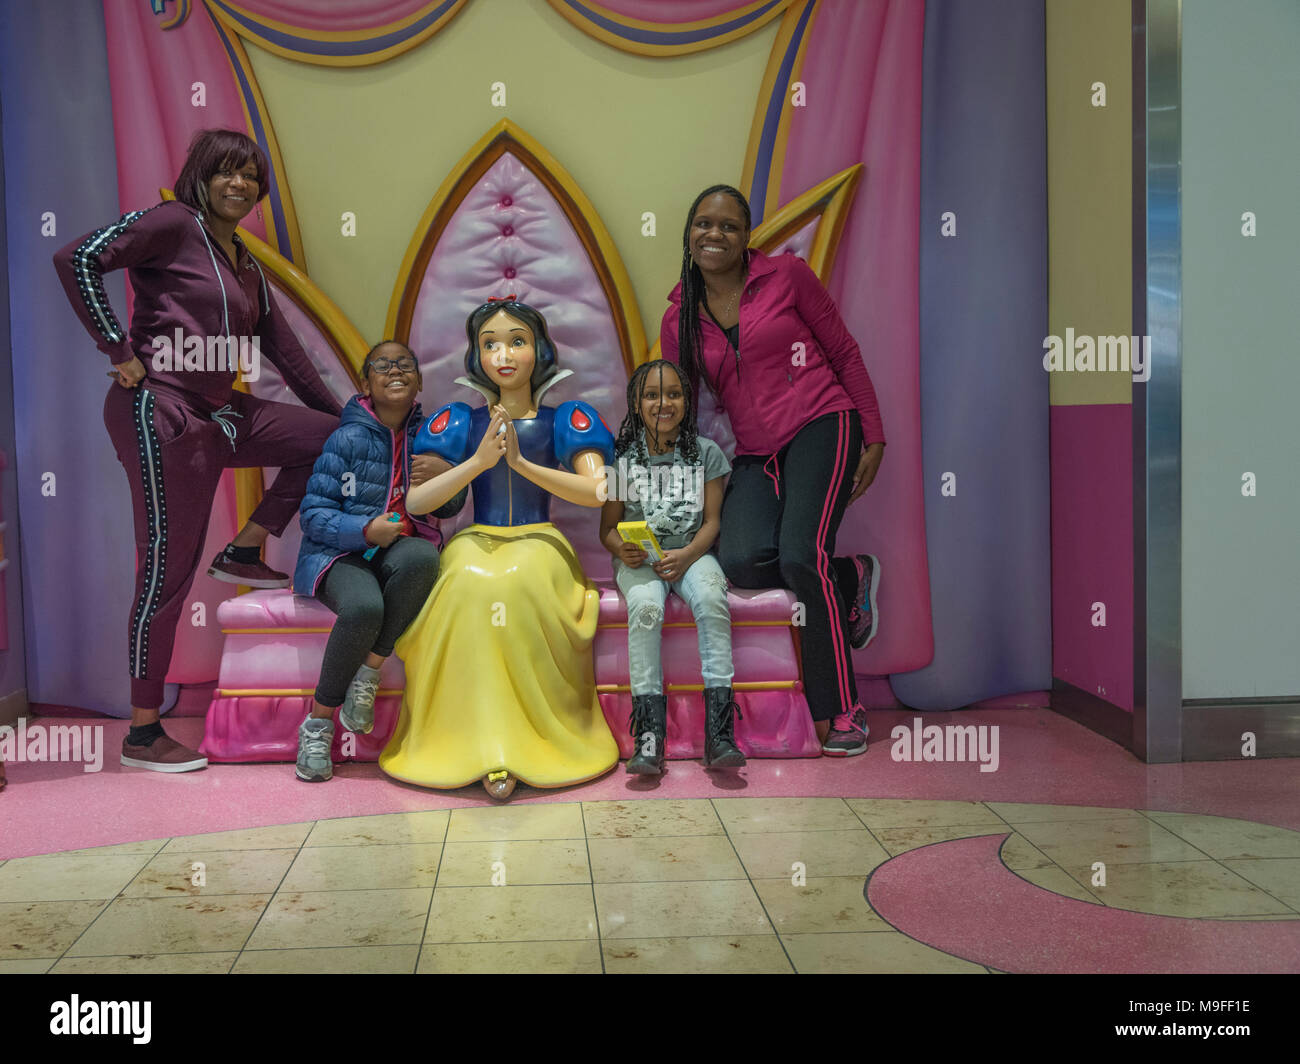 A Family traveling through the Orlando International Airport posing along side of Snow White. Stock Photo